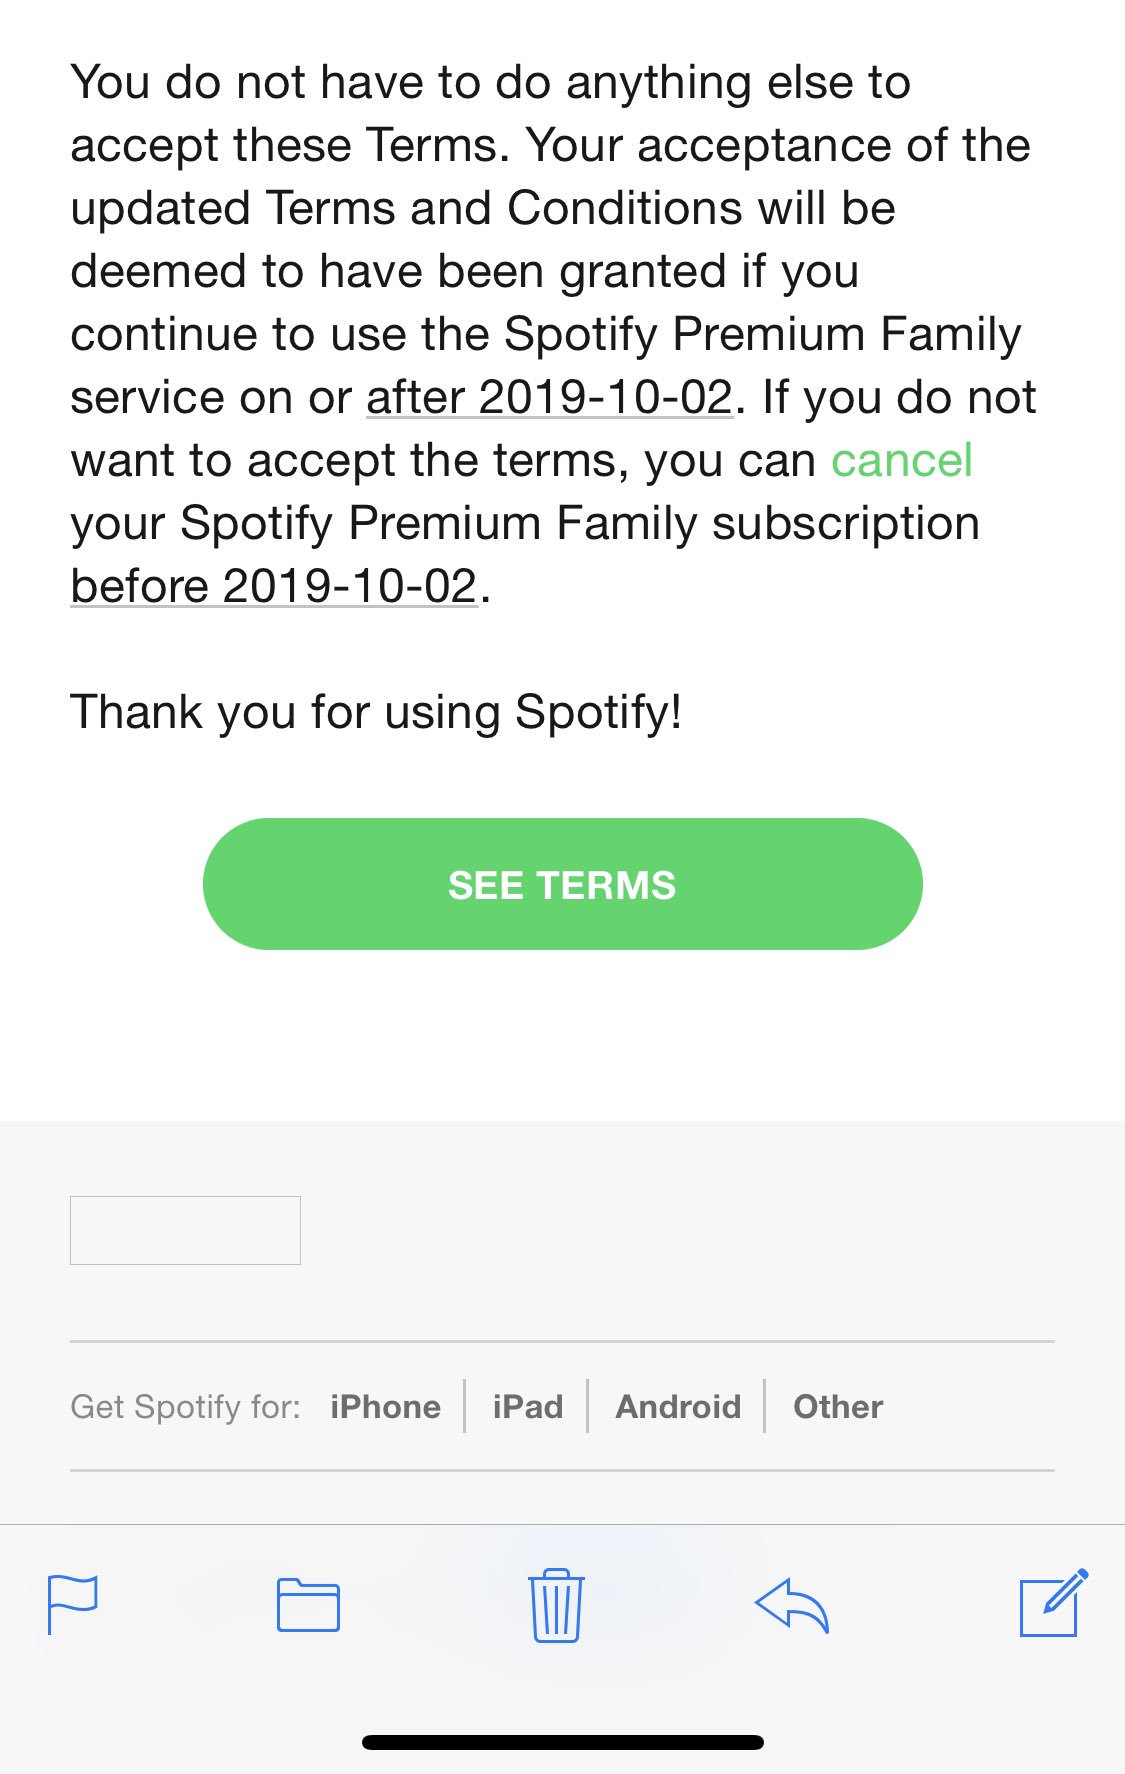 Privacy Matters on Twitter: "I have some questions for @Spotify wrt to  verifying the location of family members https://t.co/bCdnmD2jnf" / Twitter